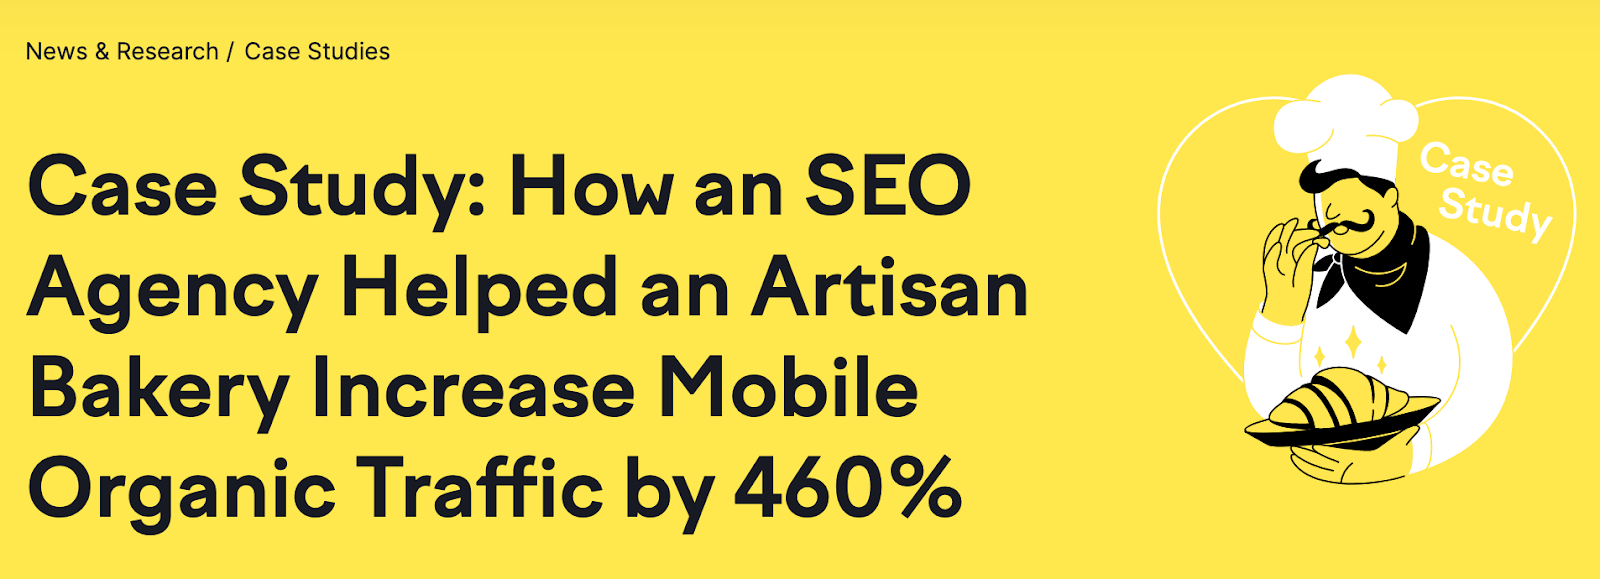 "Case Study: How an SEO Agency Helped an Artisan Bakery Increase Mobile Organic Traffic by 460%" by Semrush